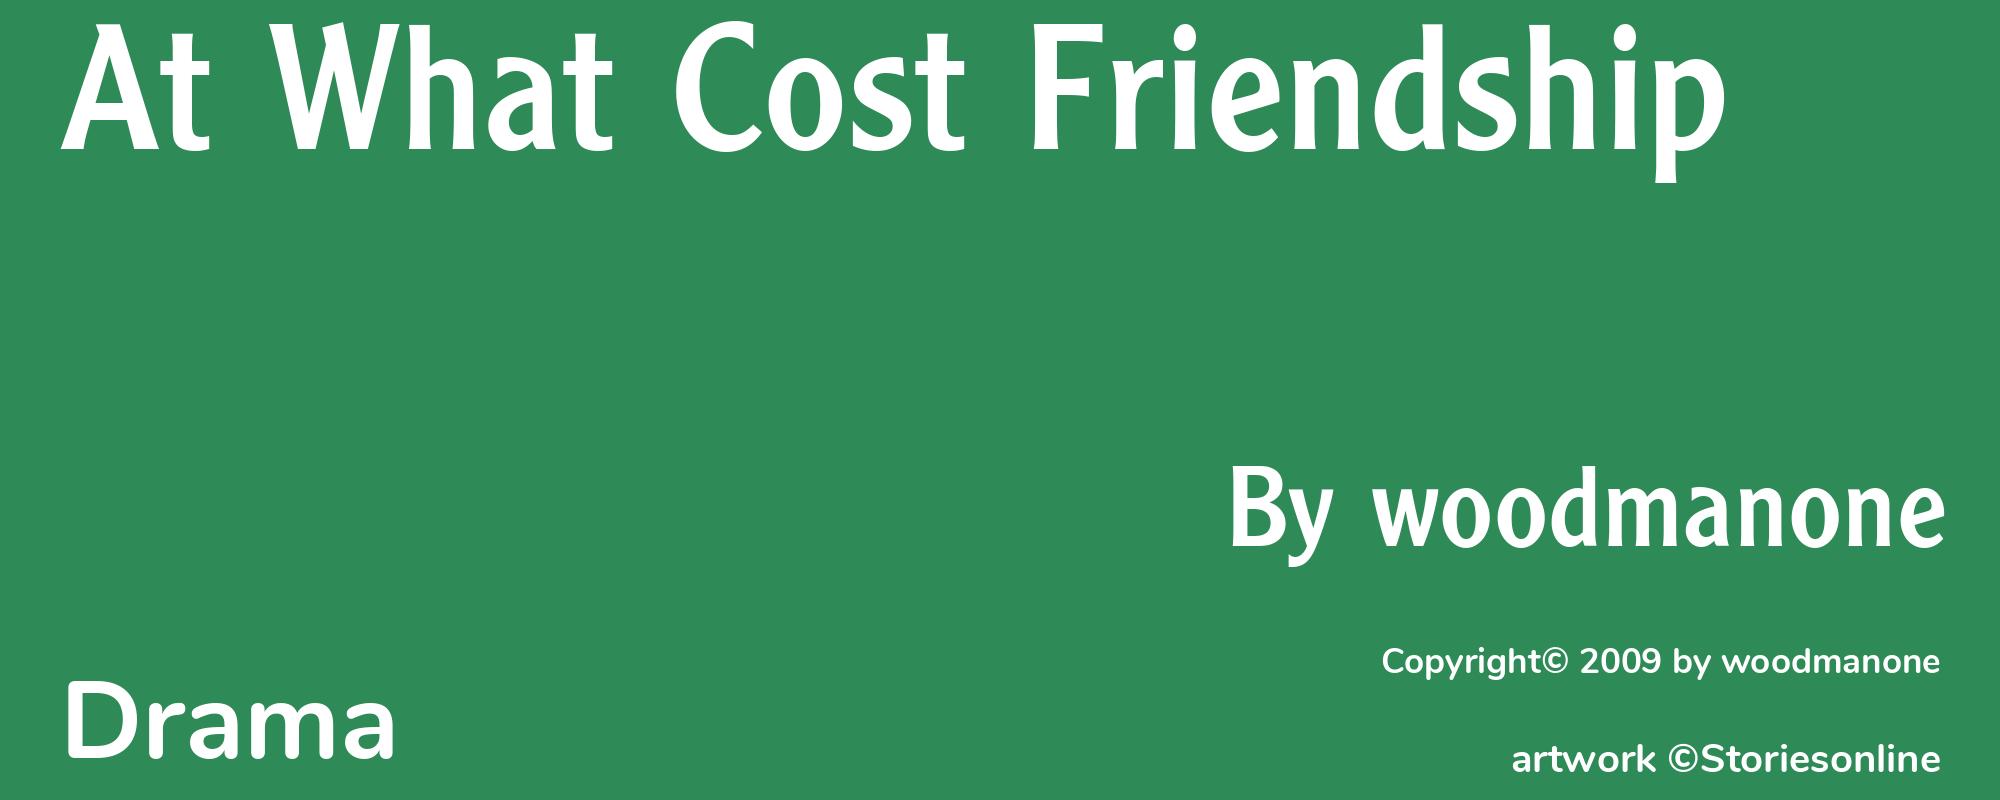 At What Cost Friendship - Cover